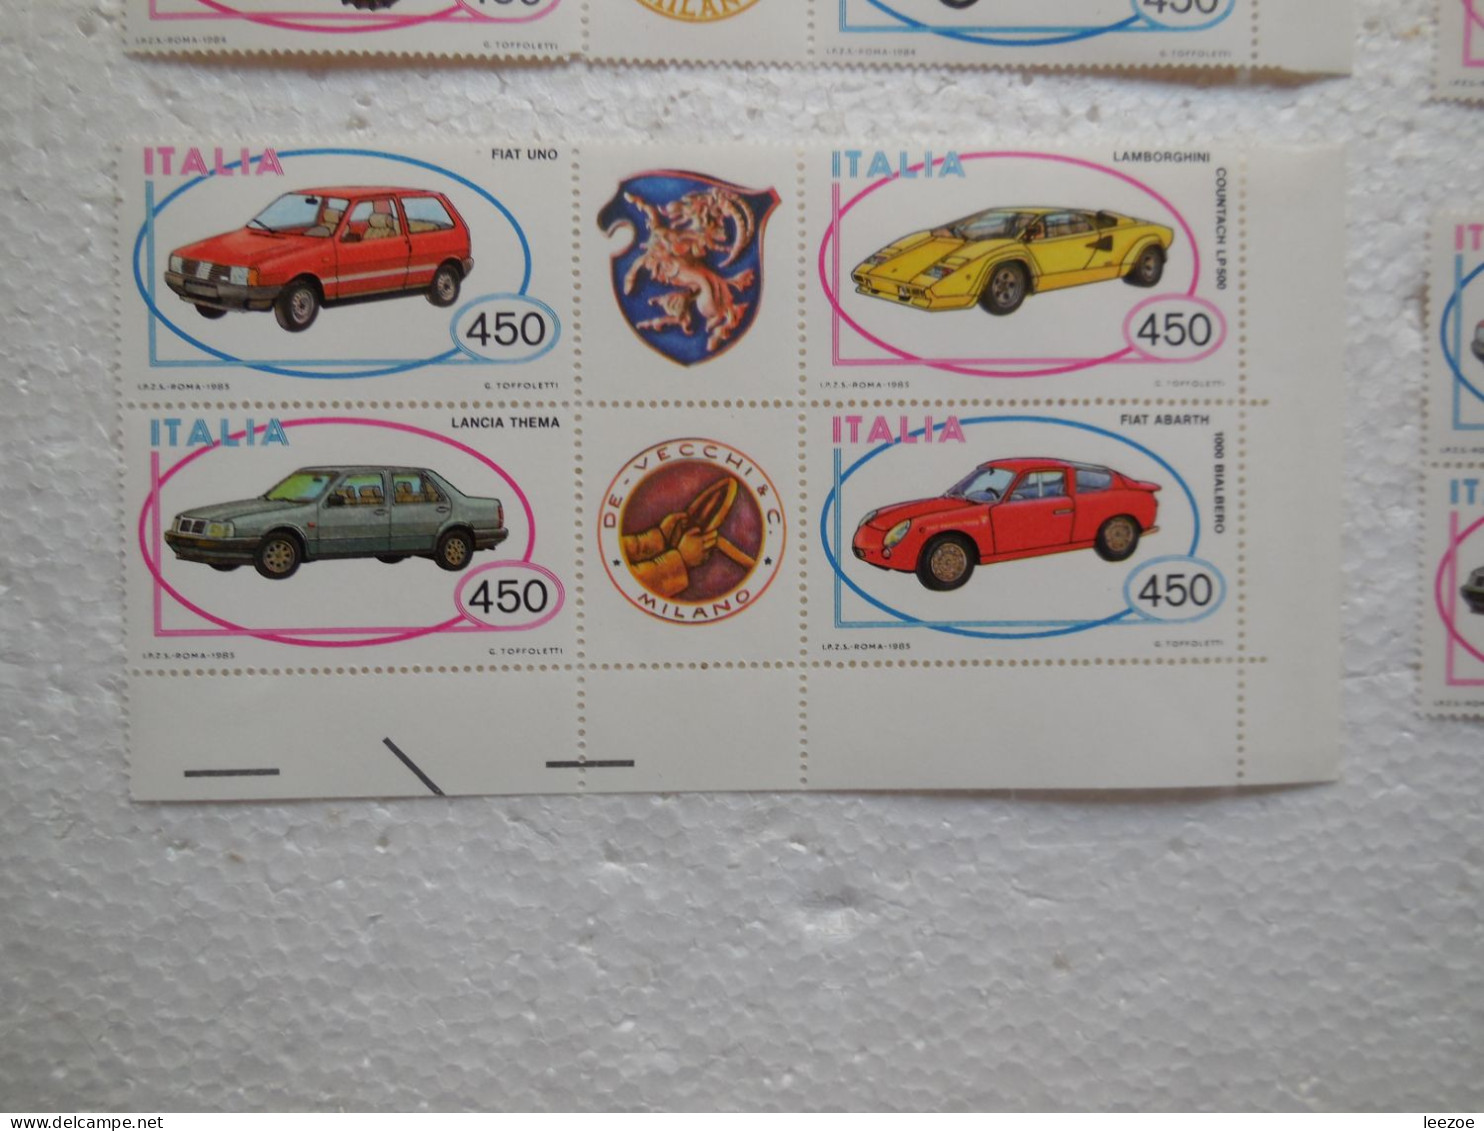 STAMP ITALIA, lot TIMBRES ITALIEN, timbres SCAT SIMI MILANO VOITURES SPORT TRACTEURS..  ...ref N5/40/8